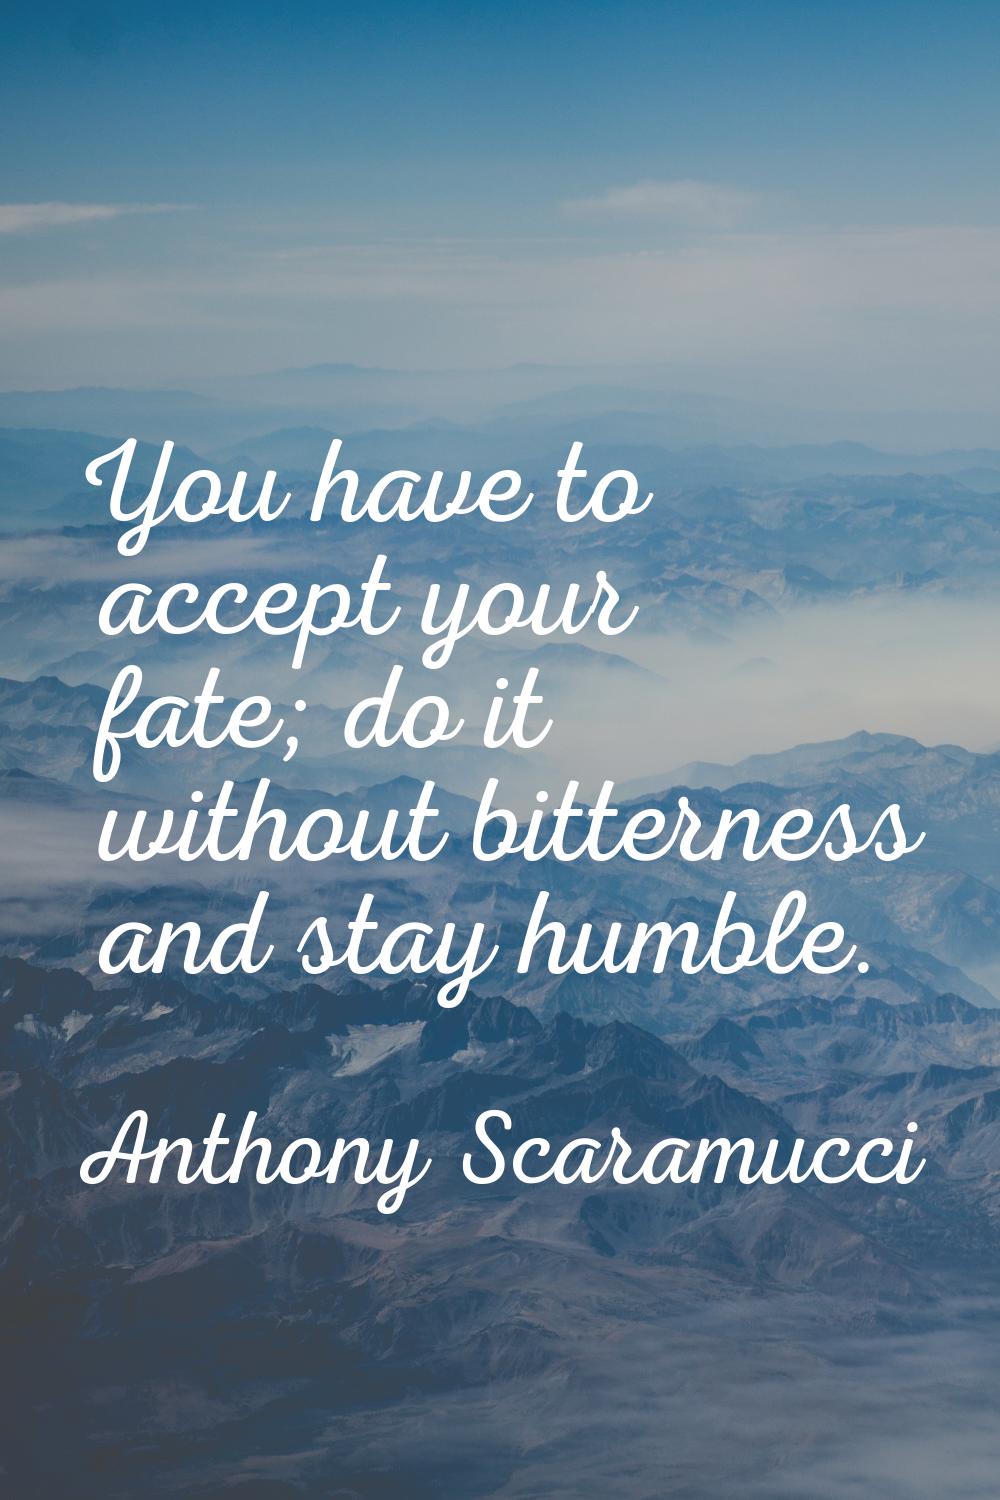 You have to accept your fate; do it without bitterness and stay humble.